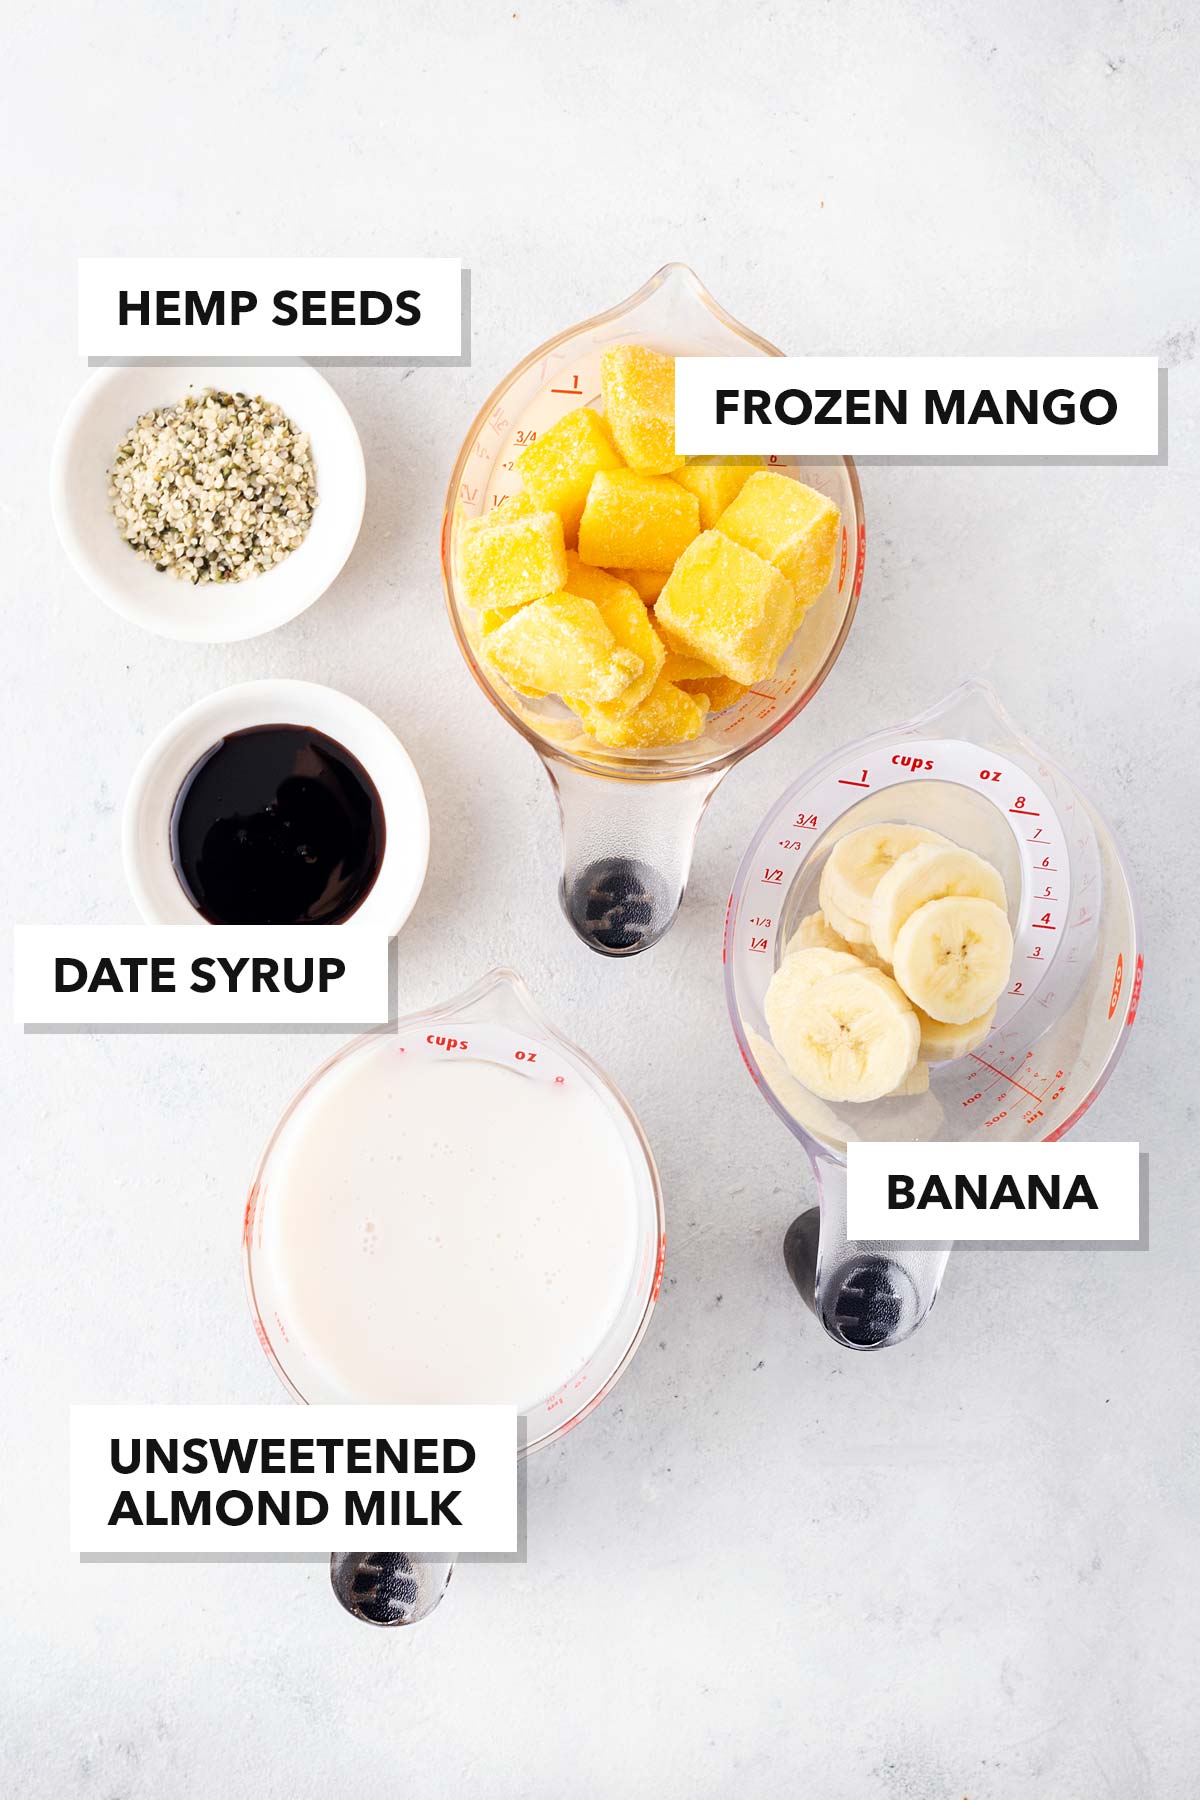 Ingredients for a mango smoothie.